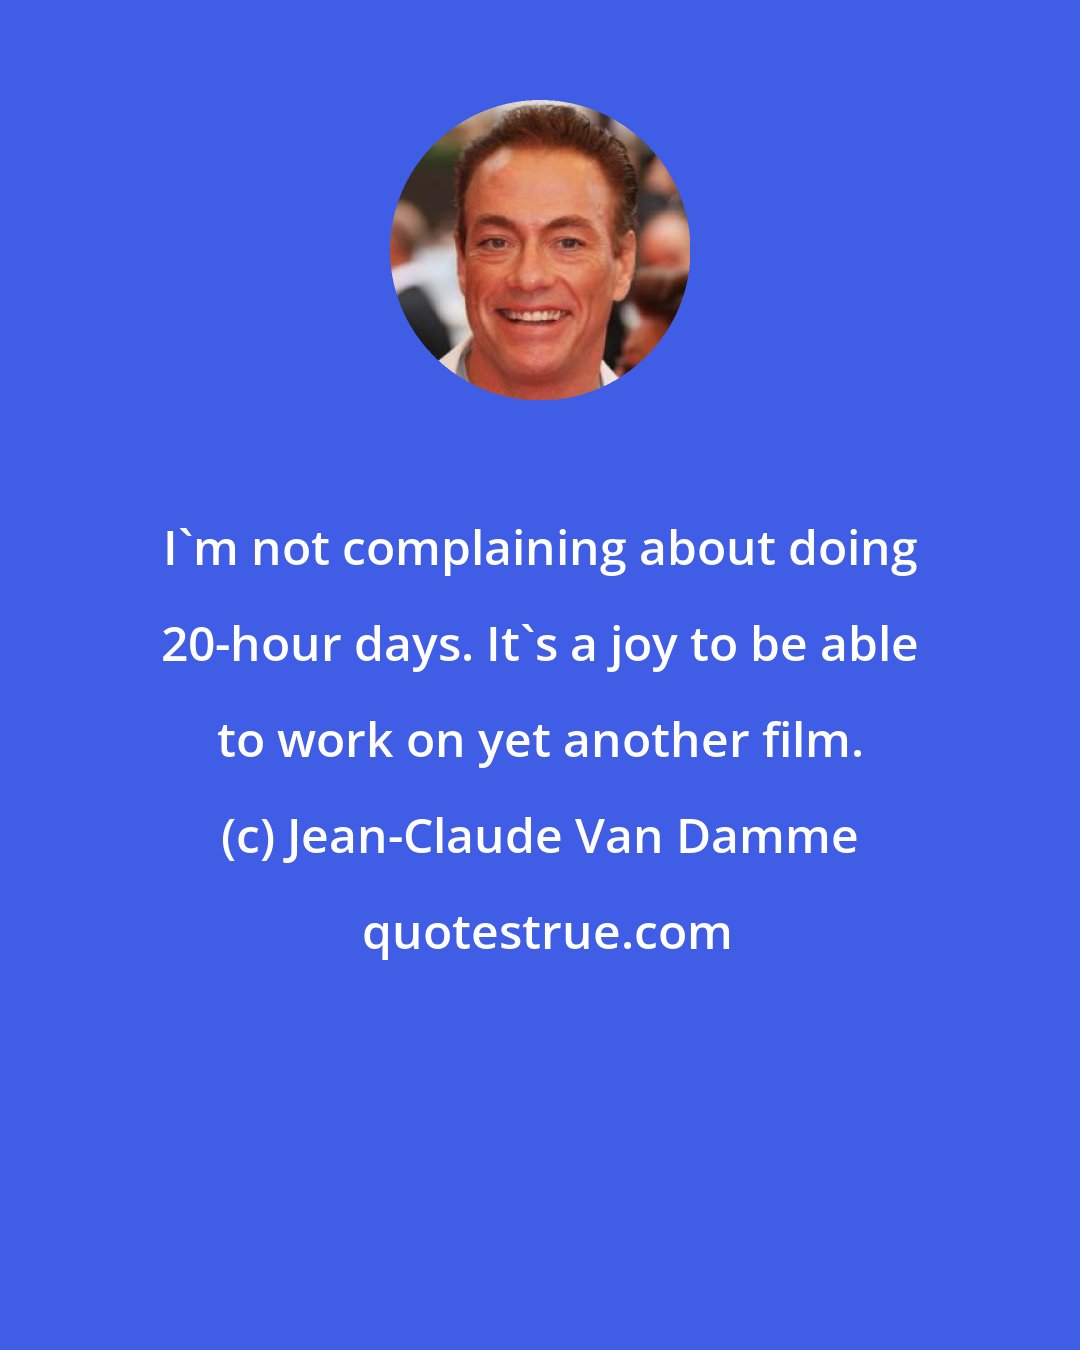 Jean-Claude Van Damme: I'm not complaining about doing 20-hour days. It's a joy to be able to work on yet another film.